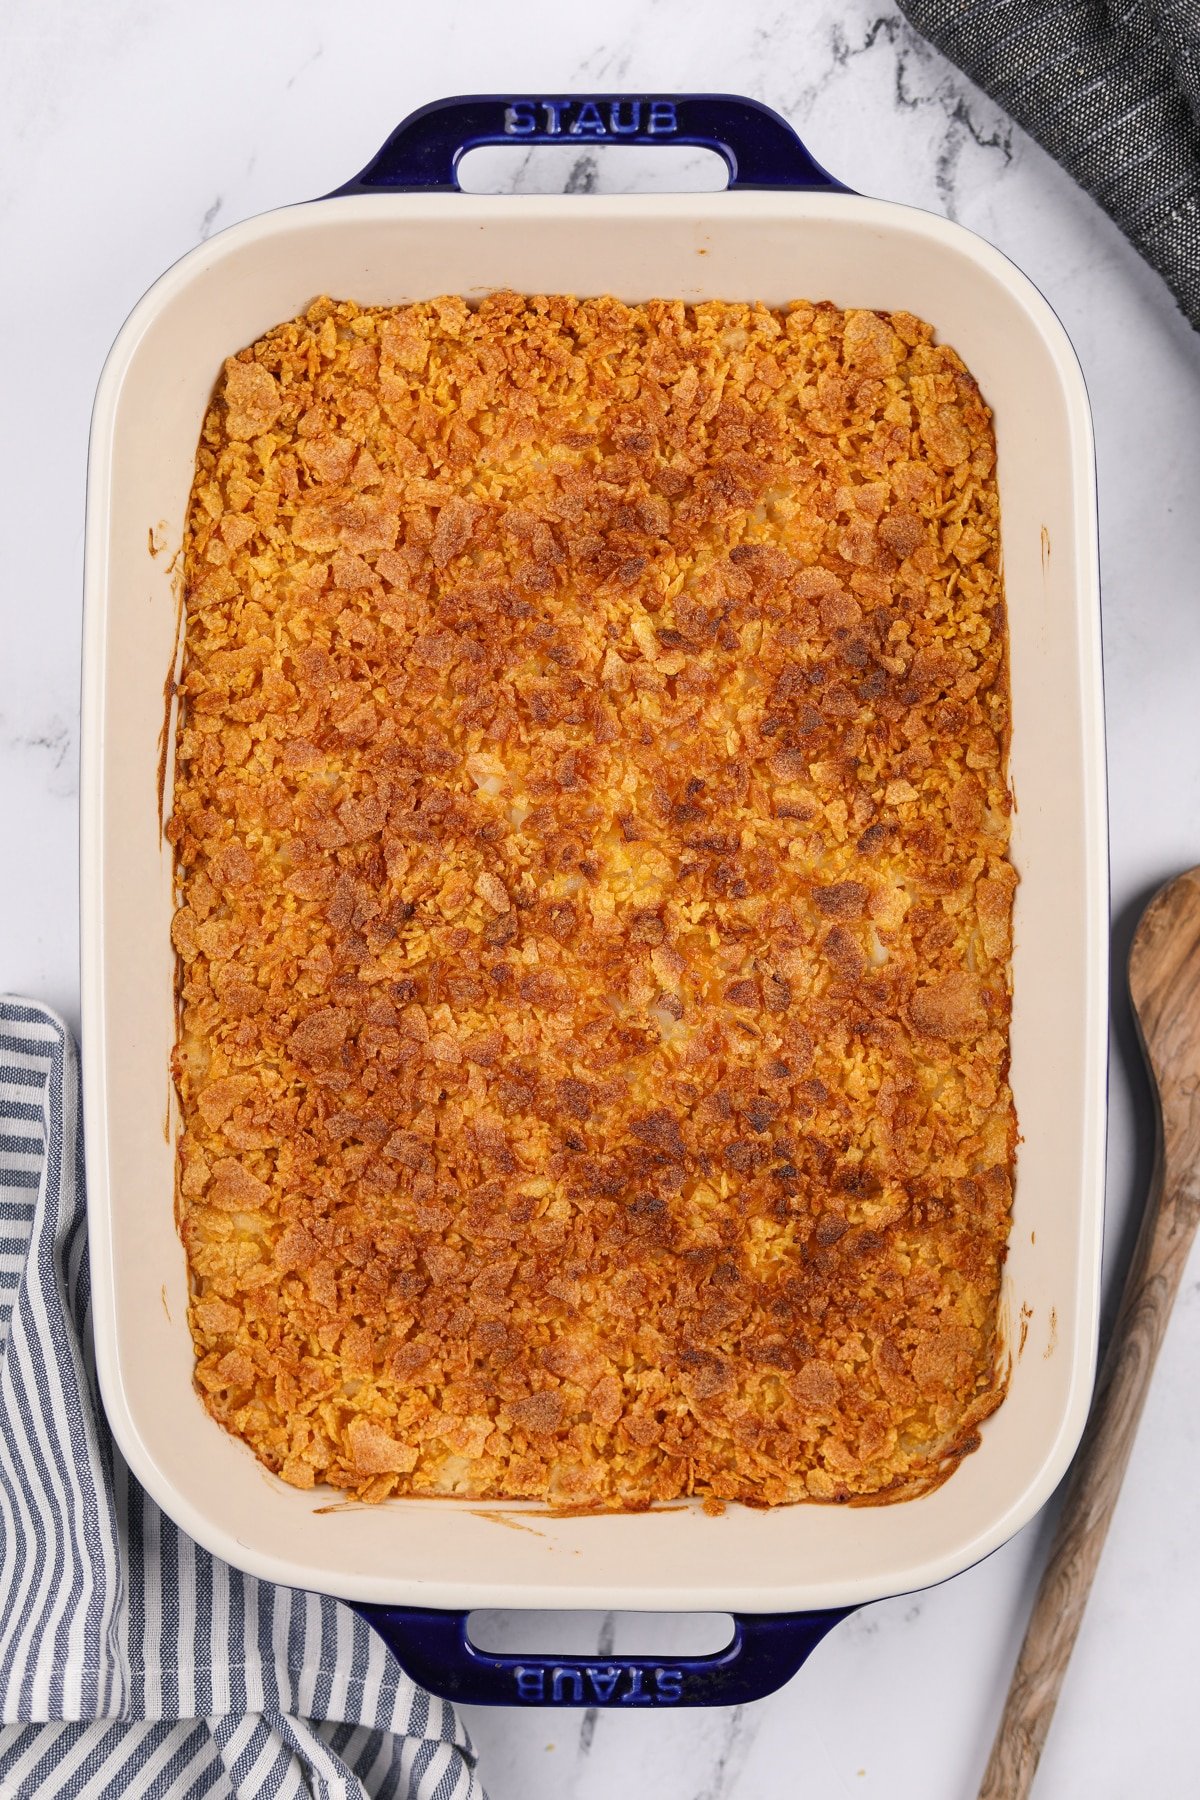 A baking dish filled with a corn flake topped casserole.